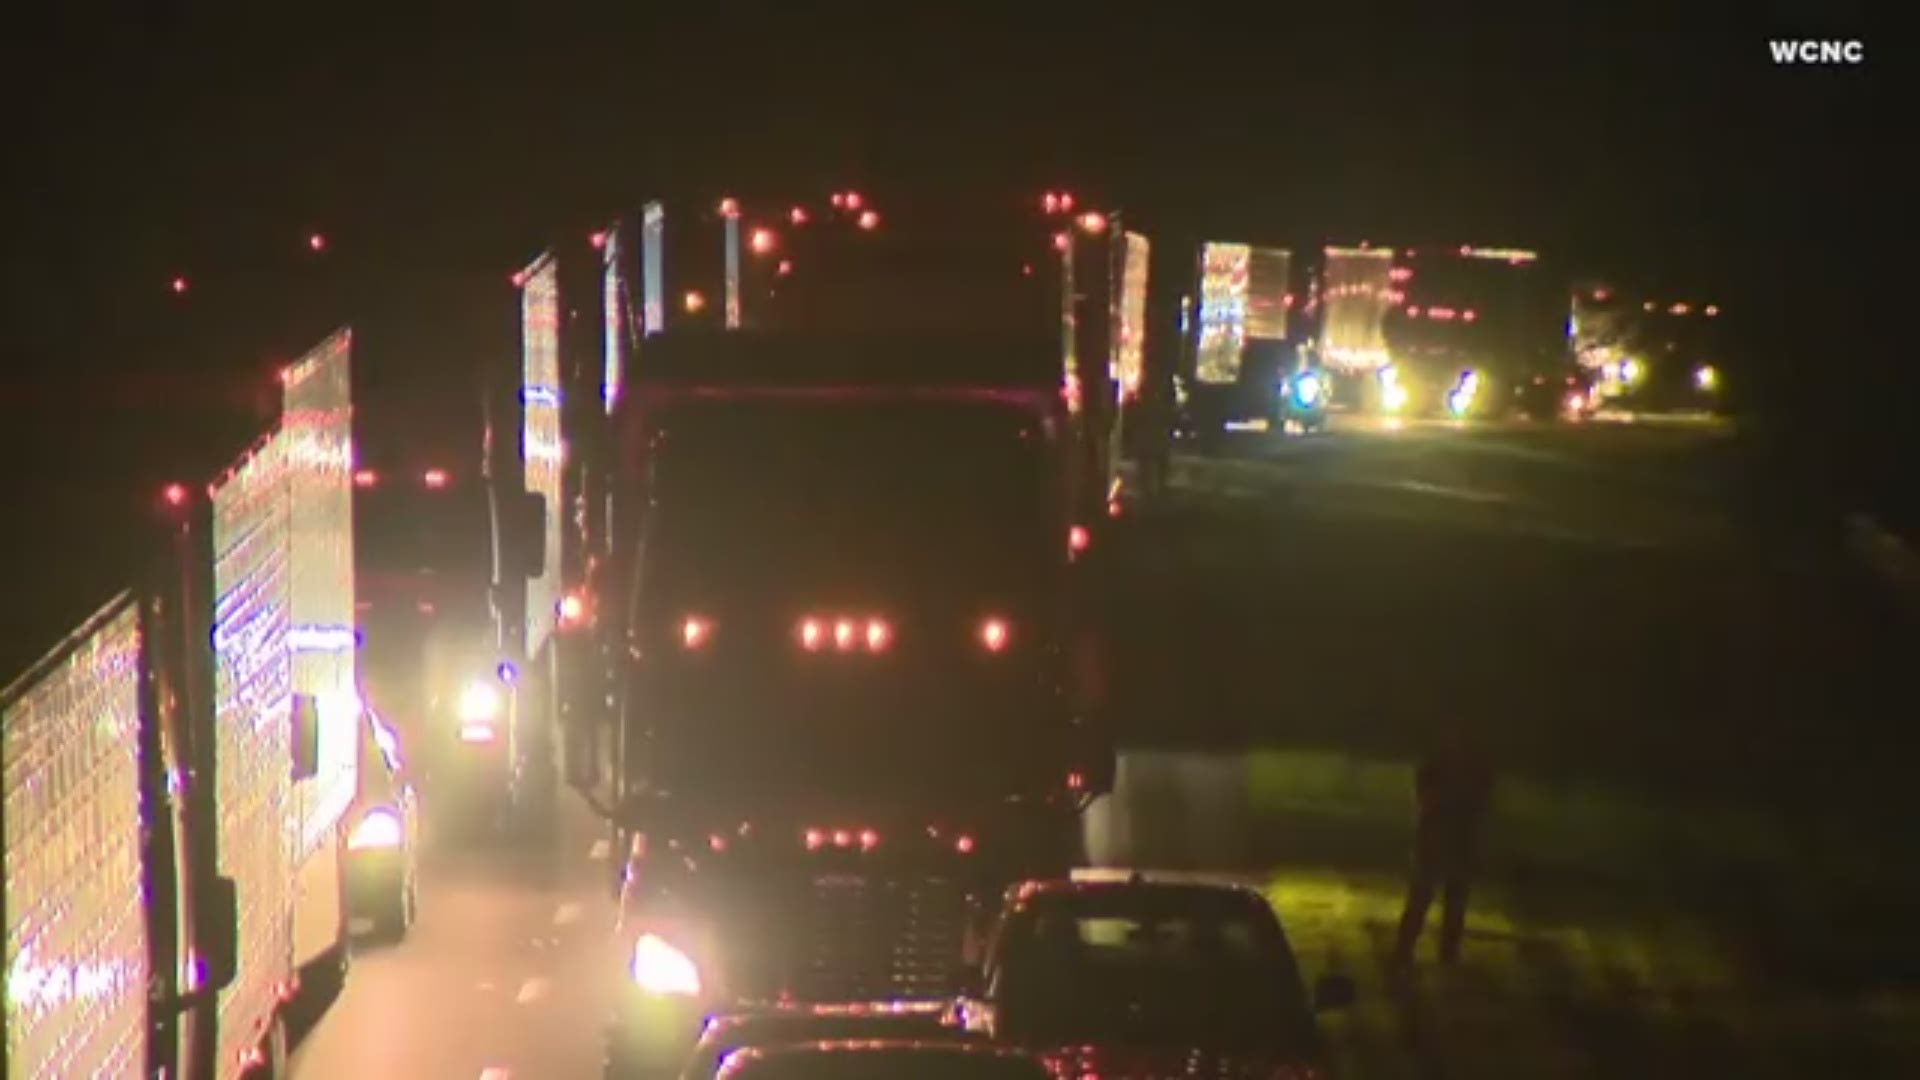 A tractor-trailer on the run from police ended in a fiery crash on I-77. The Highway Patrol said the tractor-trailer crossed state lines from Virginia into North Carolina.